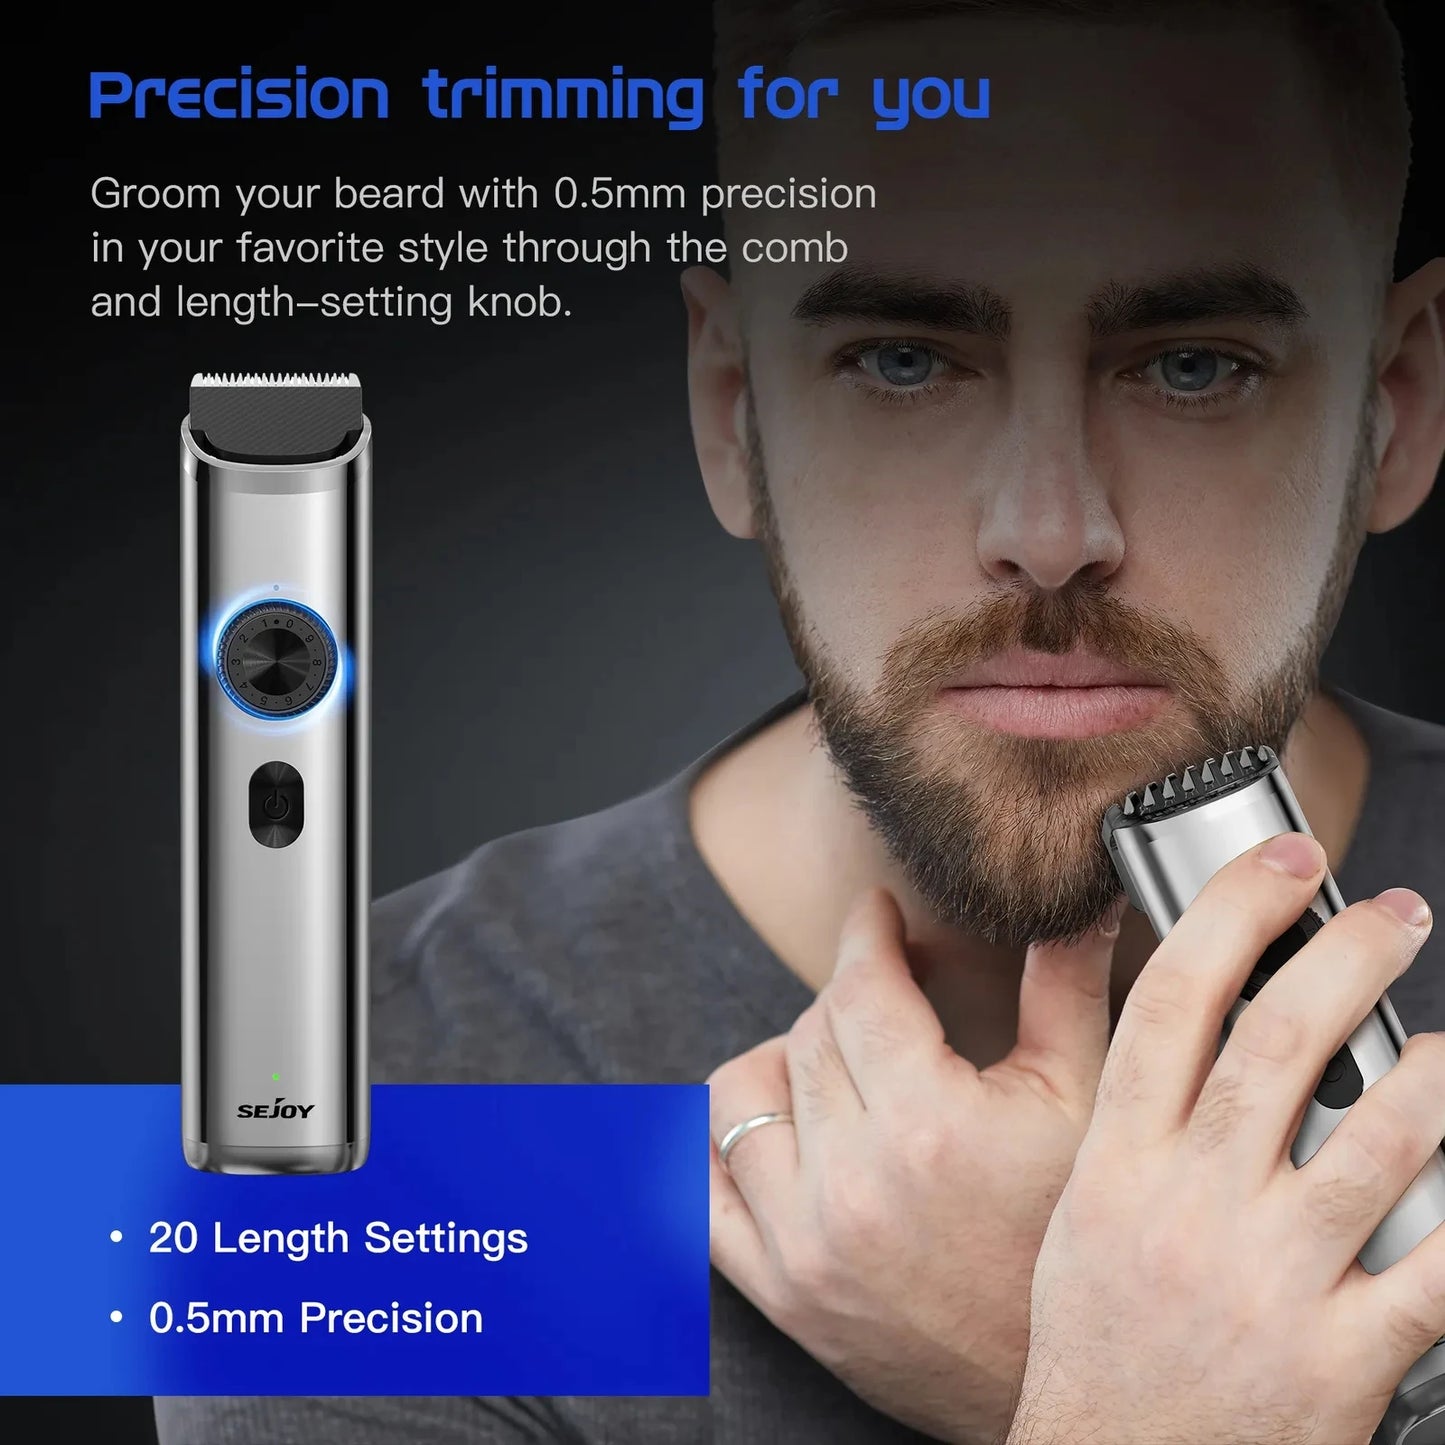 Sejoy Professional Men's Hair Clippers Trimmers USB Cordless Beard Electric Shaver